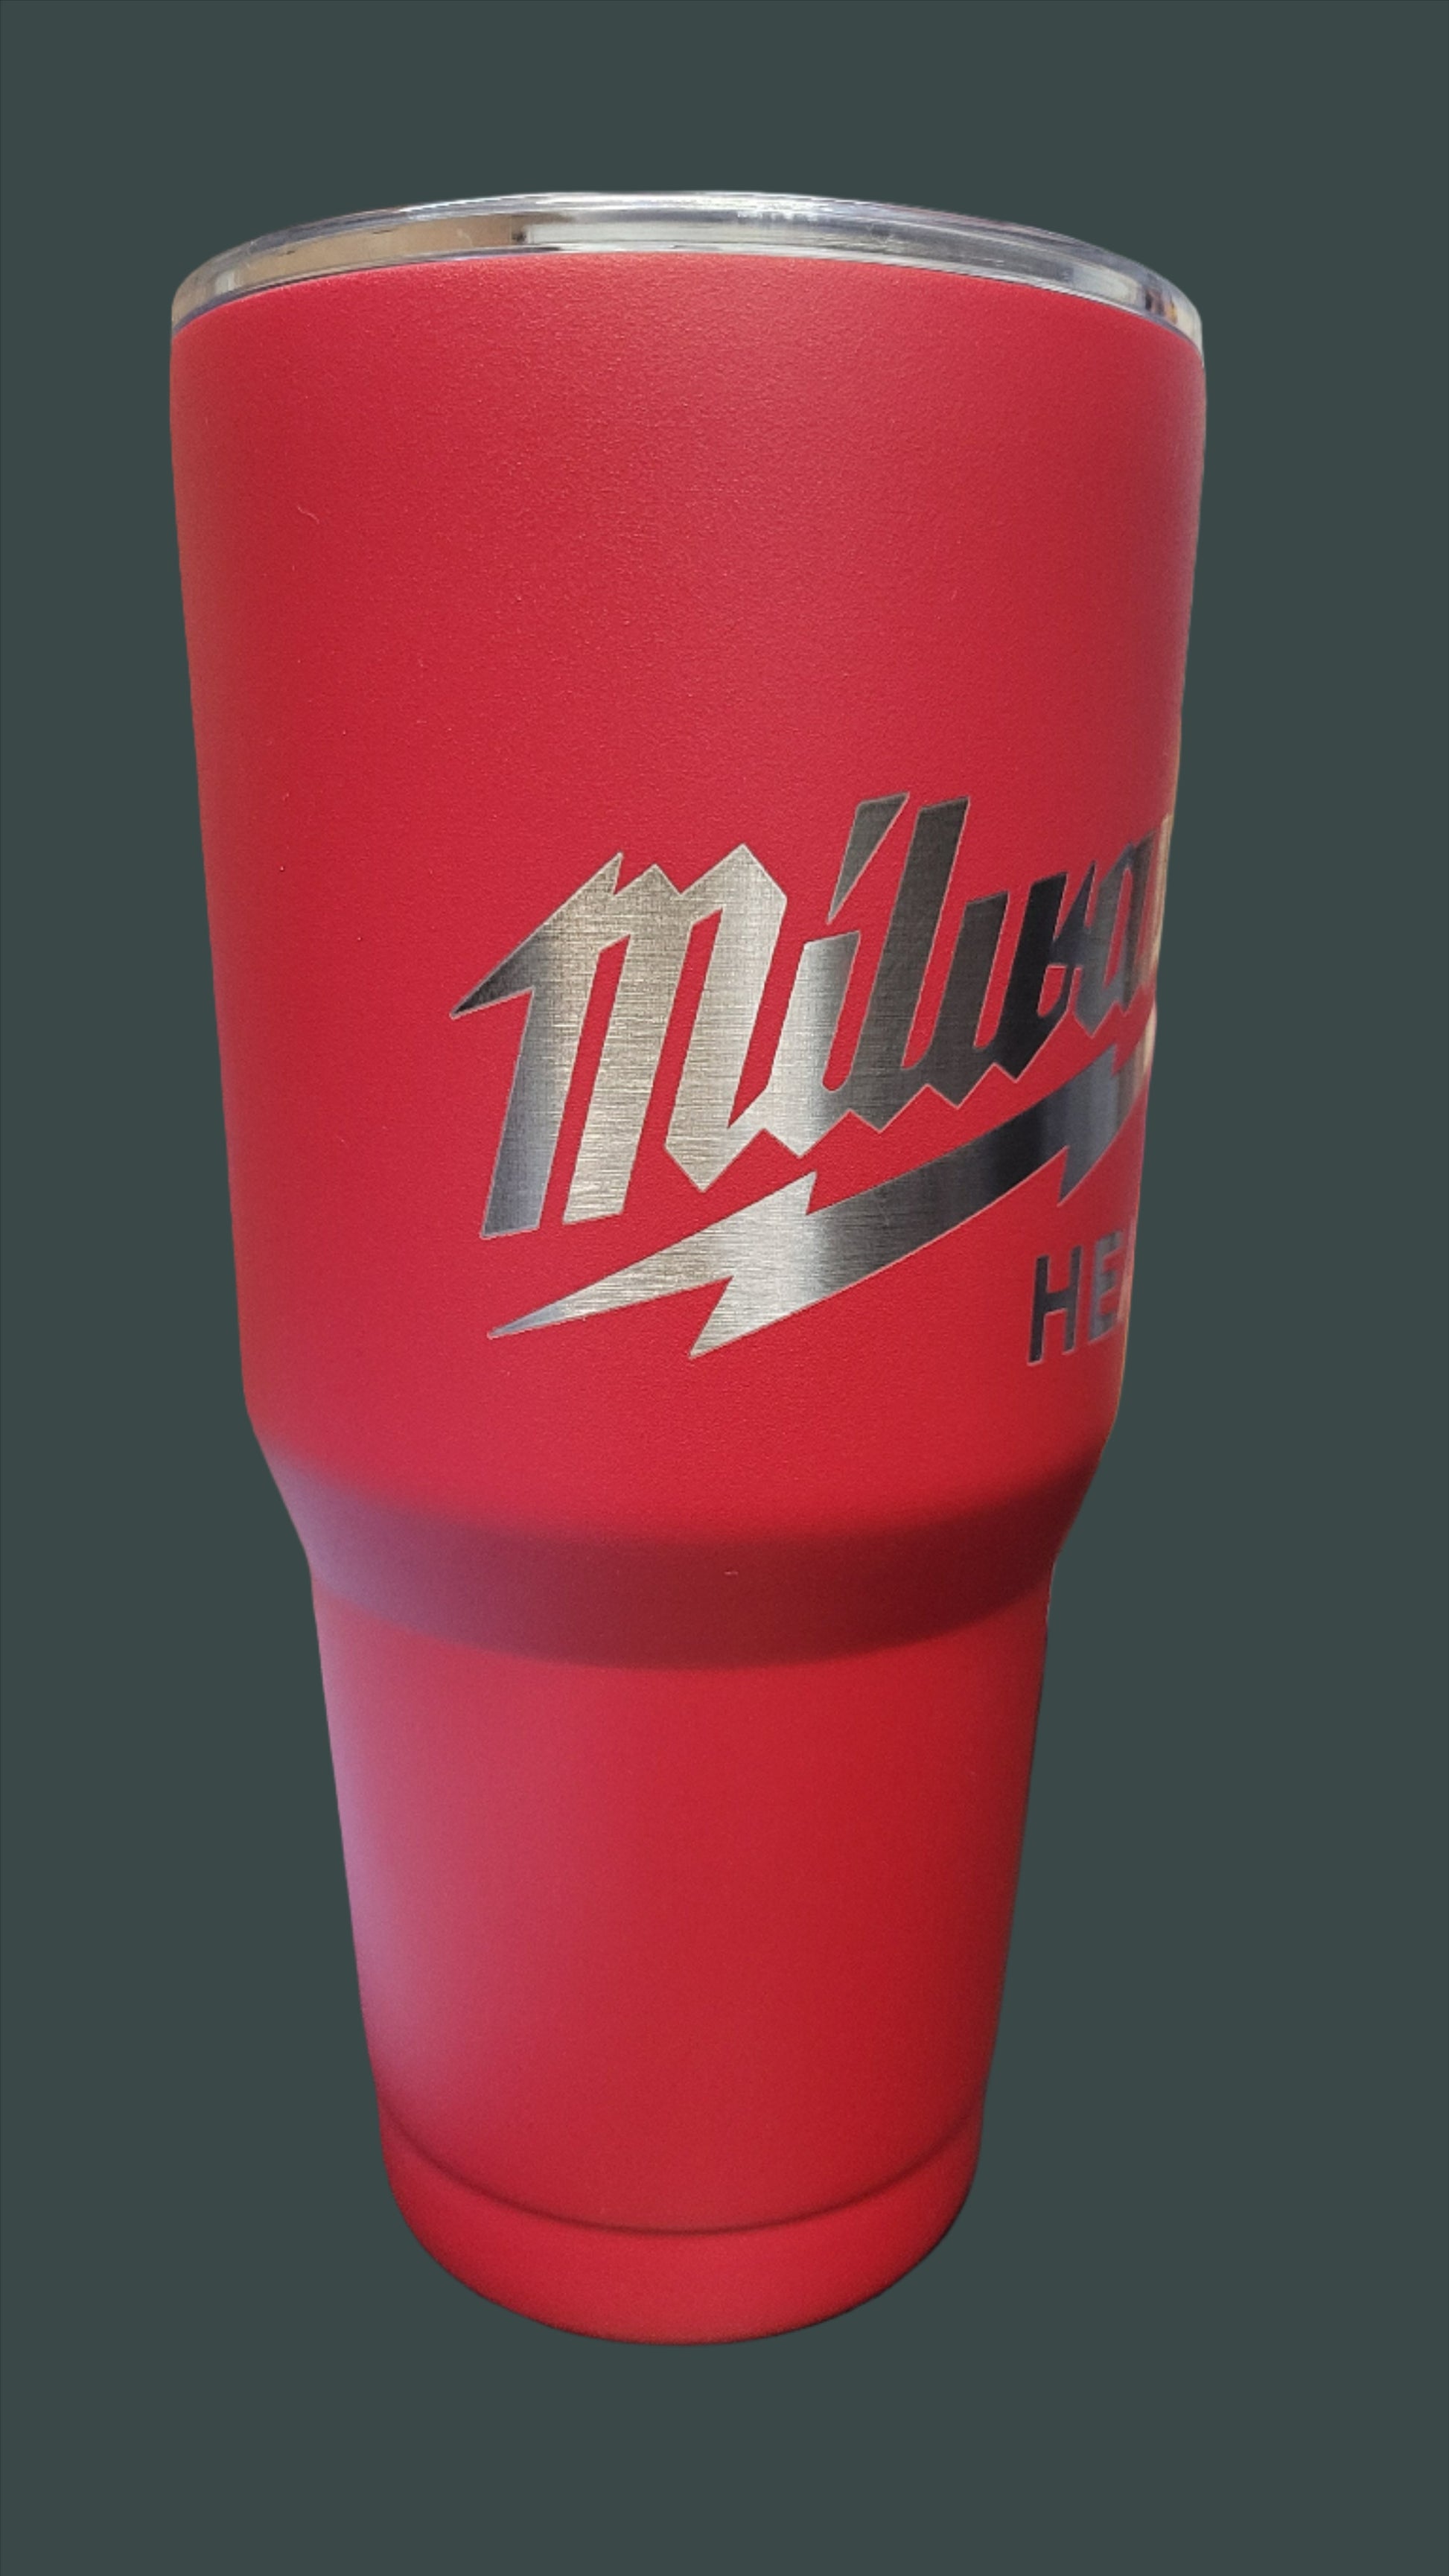 Milwaukee Heavy Duty Red laser engraved tumbler. This Makerflo 30 Oz Stainless Steel Powder Coated Tumbler is precision laser engraved and will keep your cold drinks cold or hot ones hot for long periods of time.